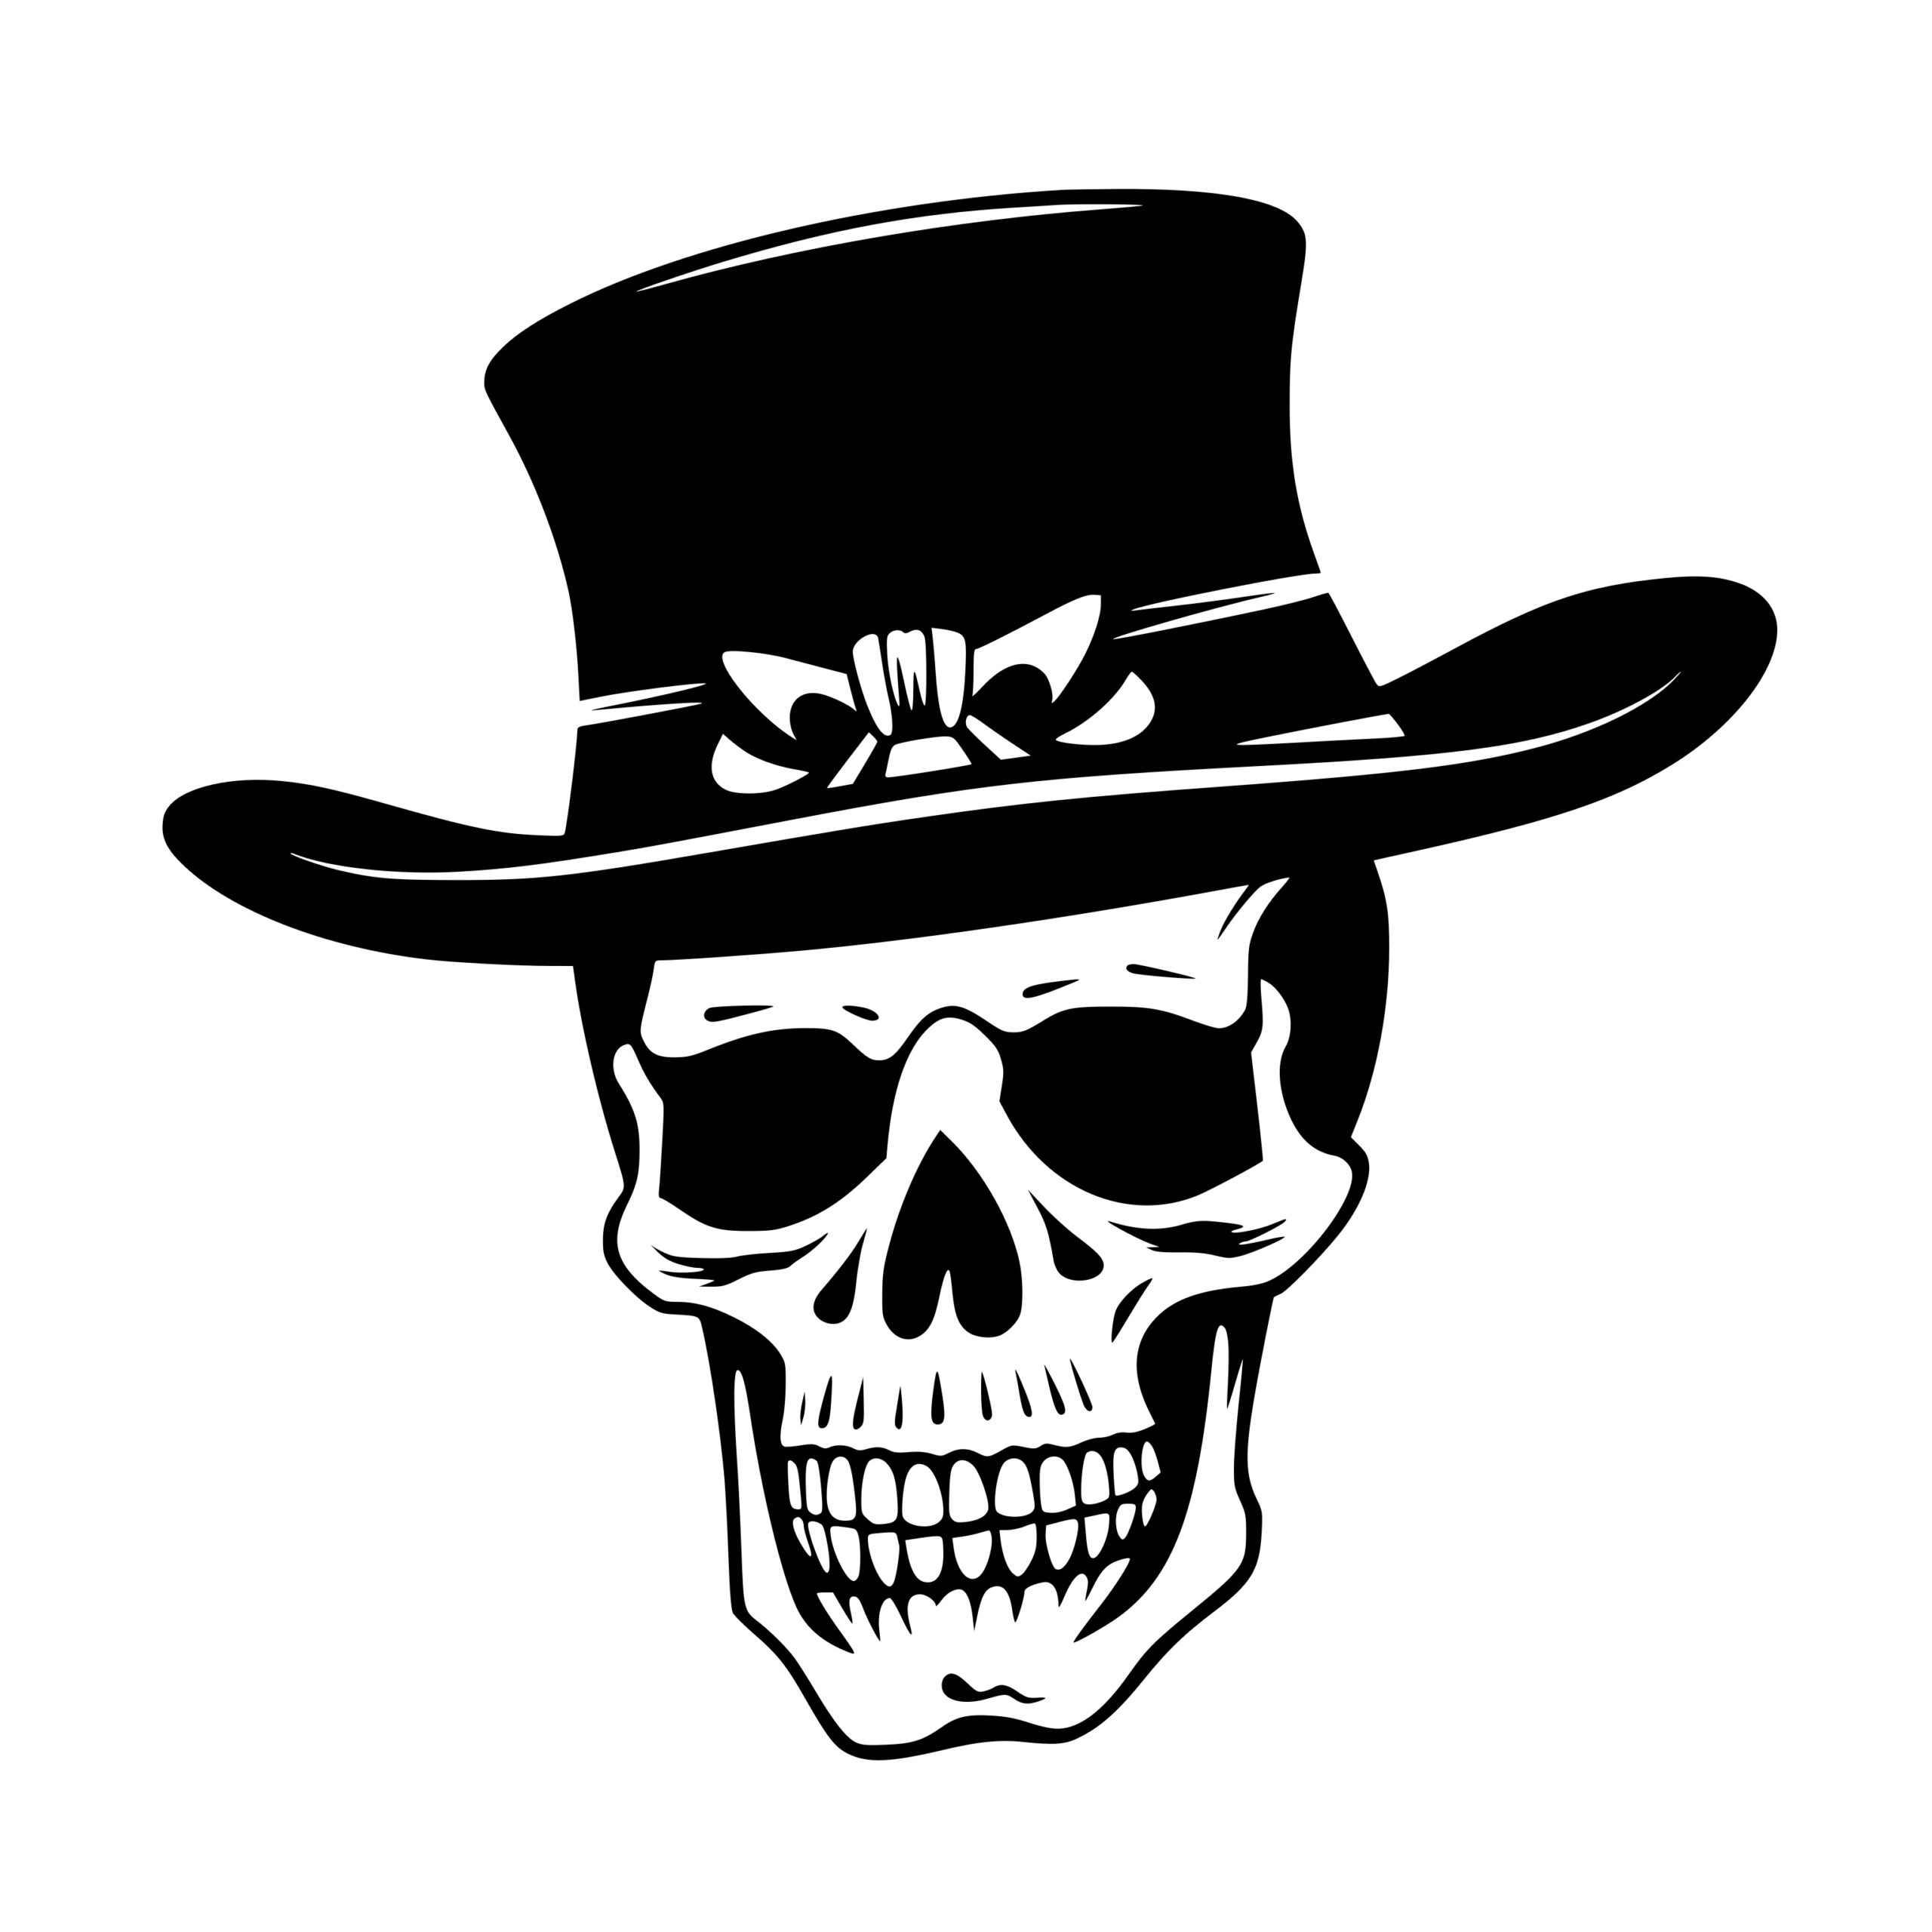 Gentleman Skeleton SVG File: Perfect for Cricut, Silhouette, Laser Machines